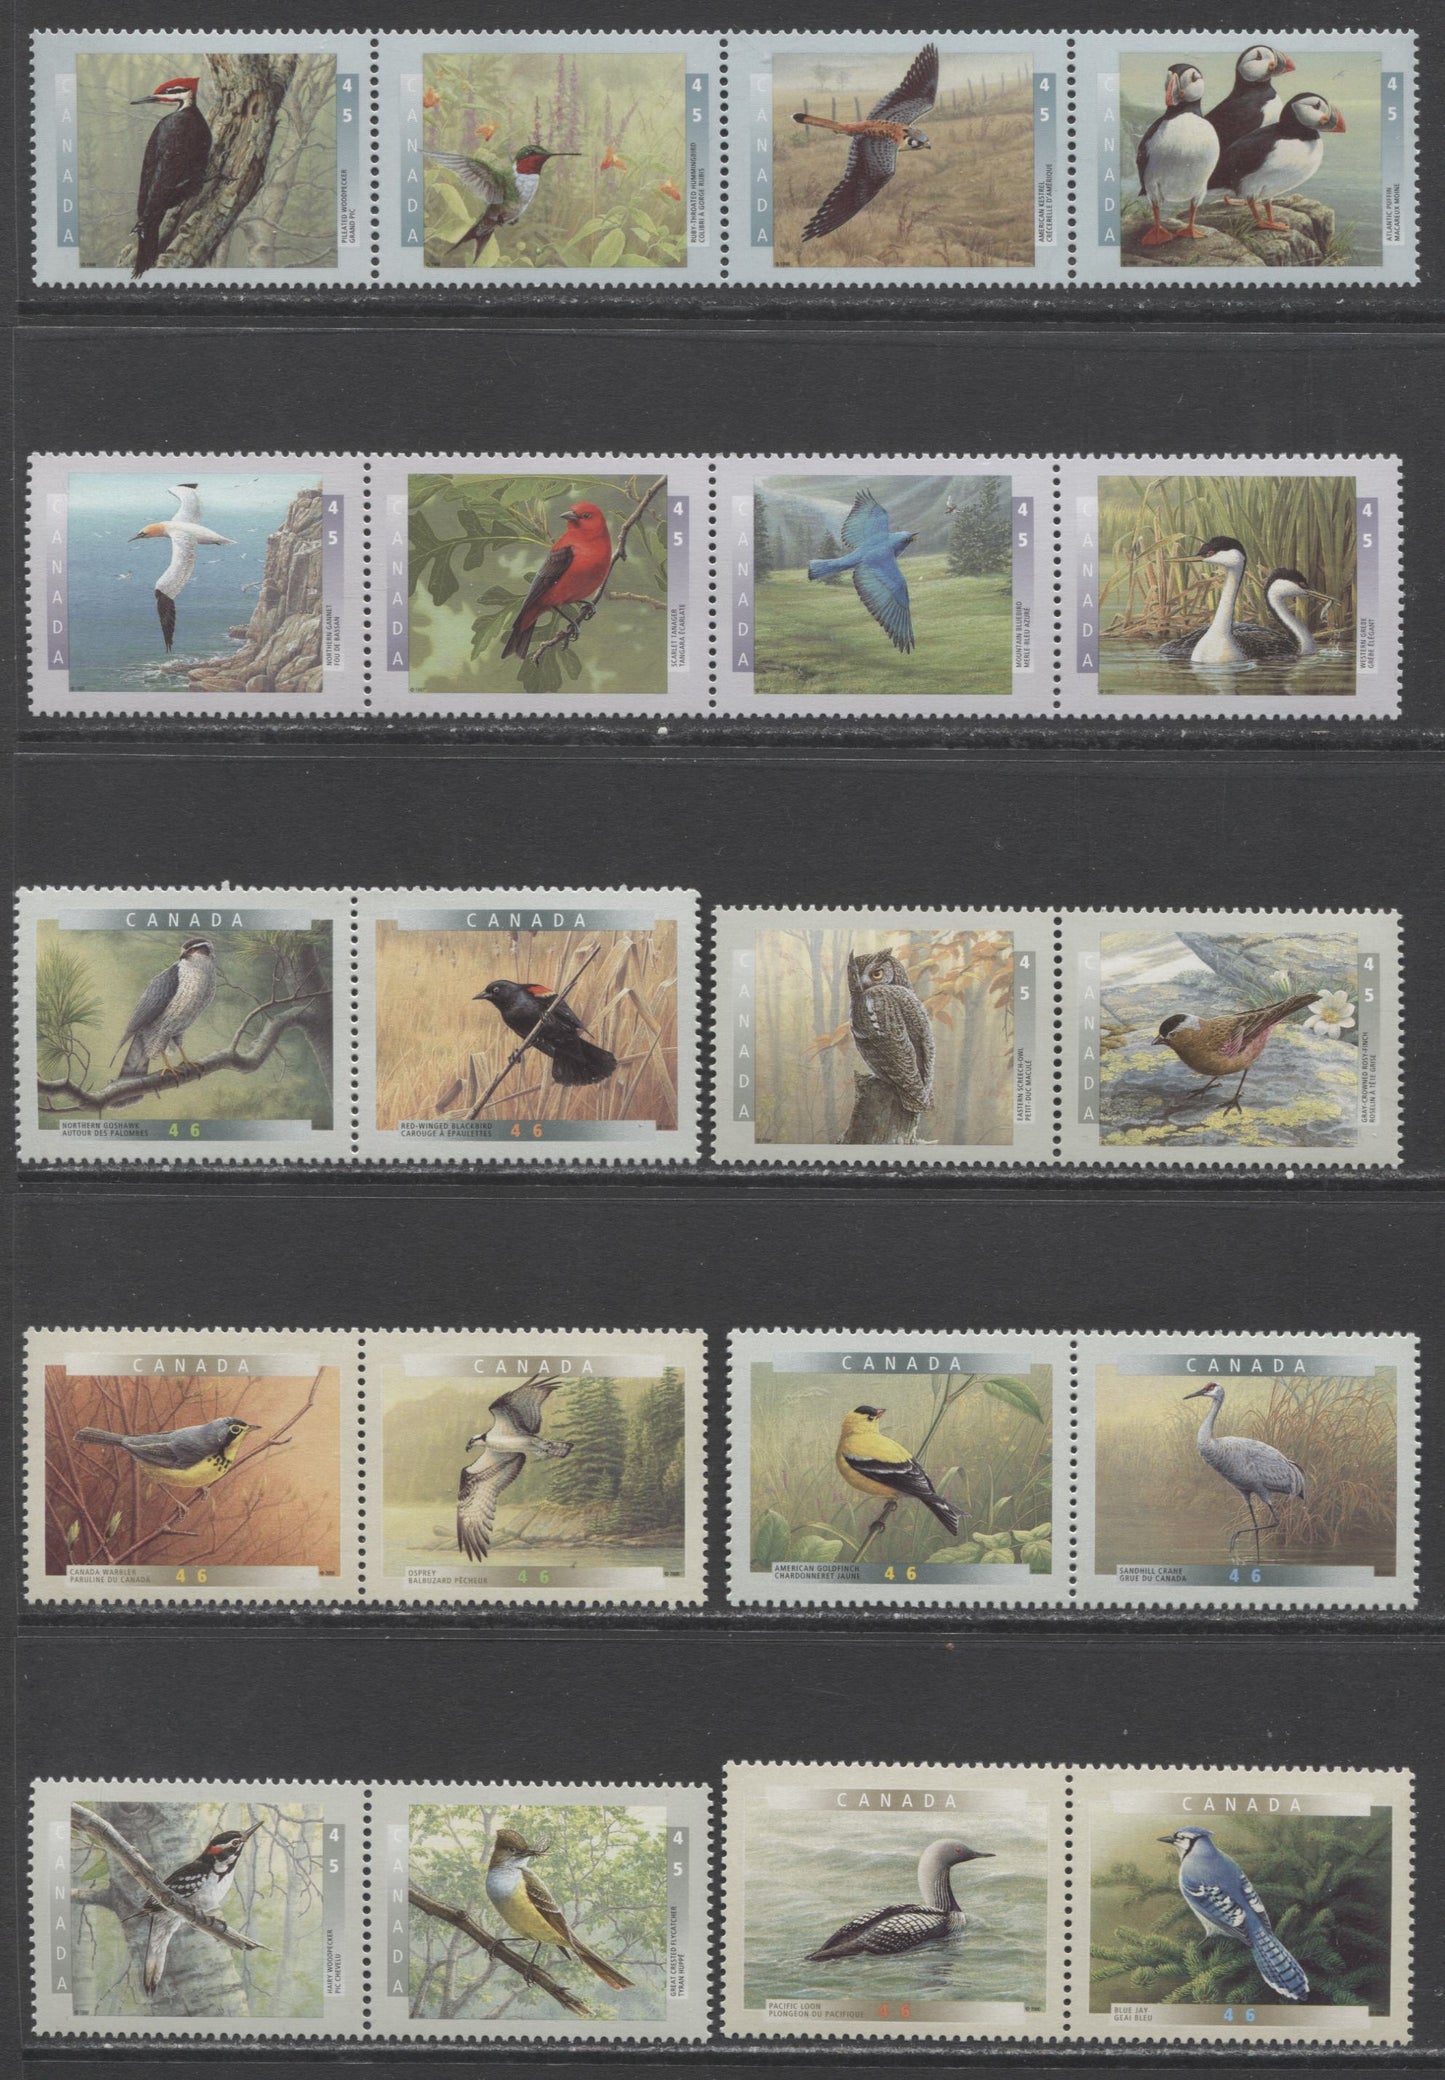 Lot 422 Canada #1594a, 1634a, 1713a, 1737a, 1724a, 1773a, 1842a 45c Multicolored American Kestrel - Blue Jay, 1996-2000 Commemoratives, 10 VFNH Strips & Pairs